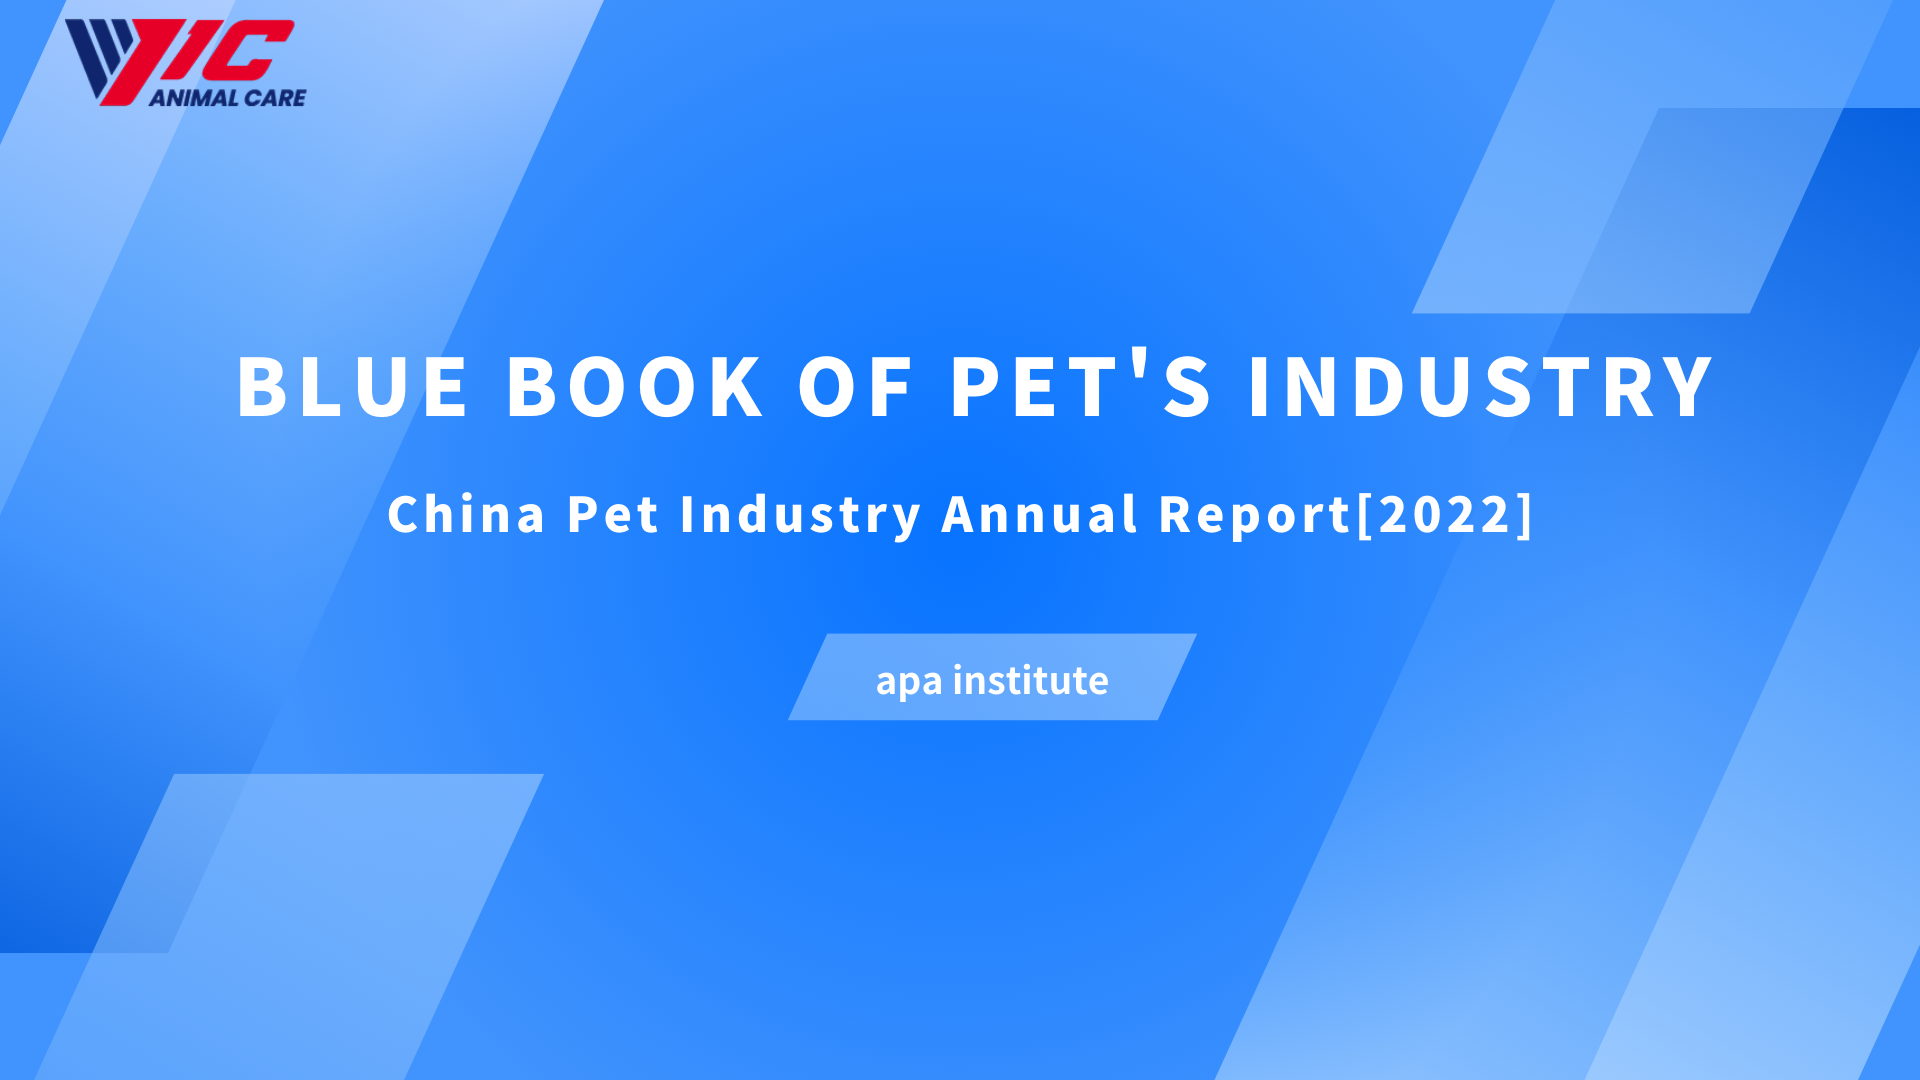 BLUE LIBRO SA PET'S INDUSTRY-China Pet Industry Annual Report[2022]